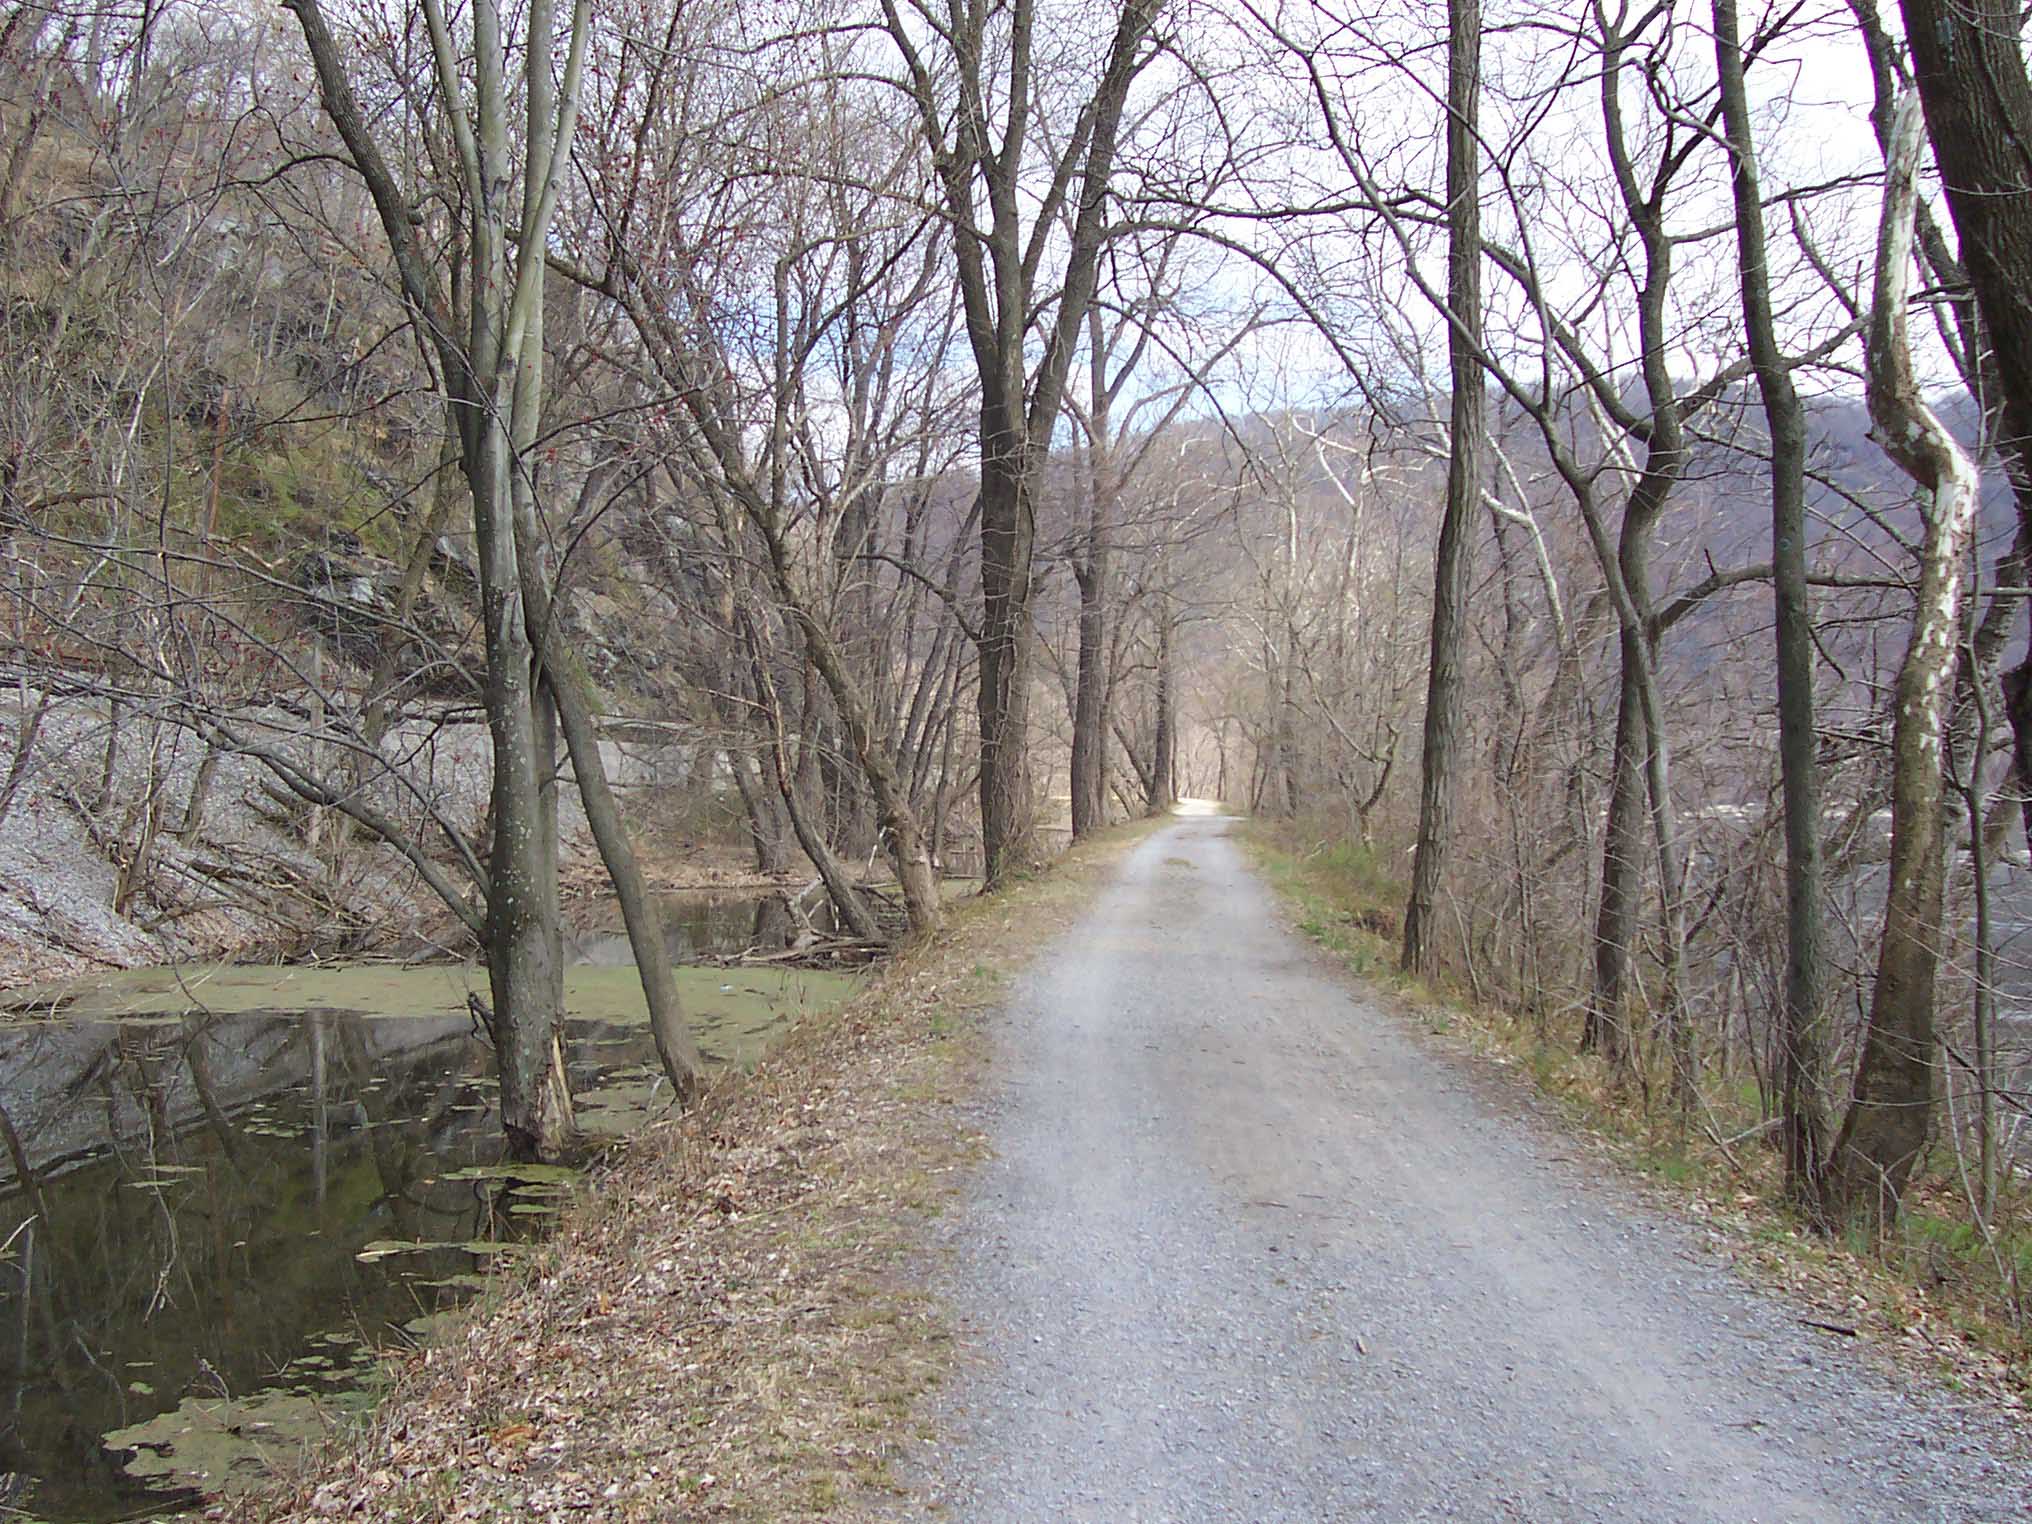 Chesapeake and Ohio canal towpath (AT). Canal remnants are on left, Potomac River on right. Courtesy dlcul@conncoll.edu